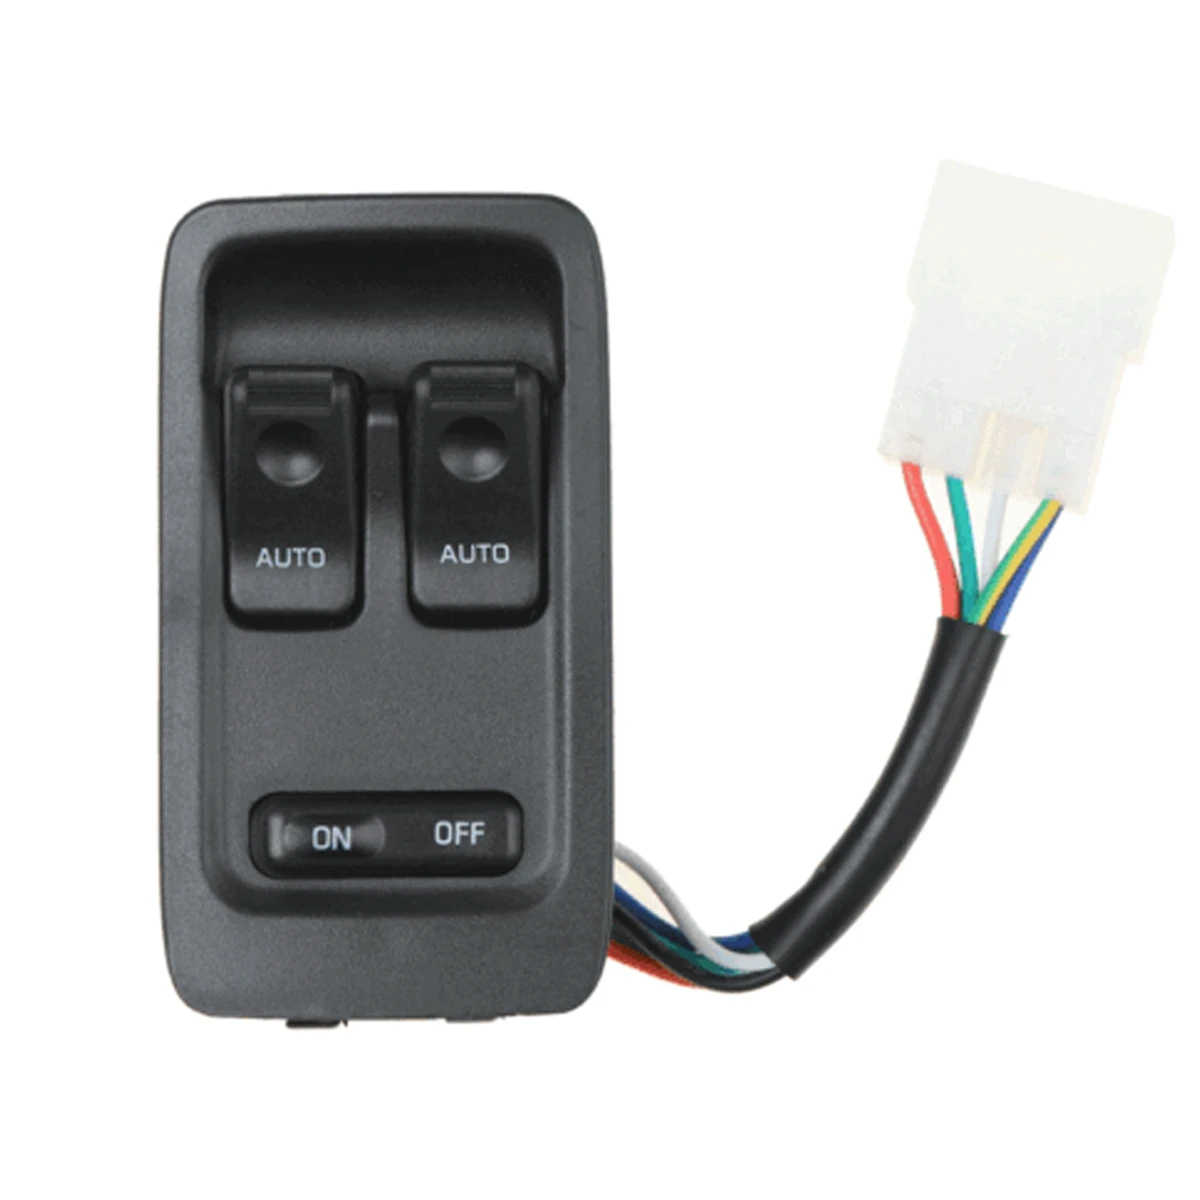 

FD14-66-350C Car Master Power Window Control Switch Fits for Mazda RX7 RX-7 1993-2002